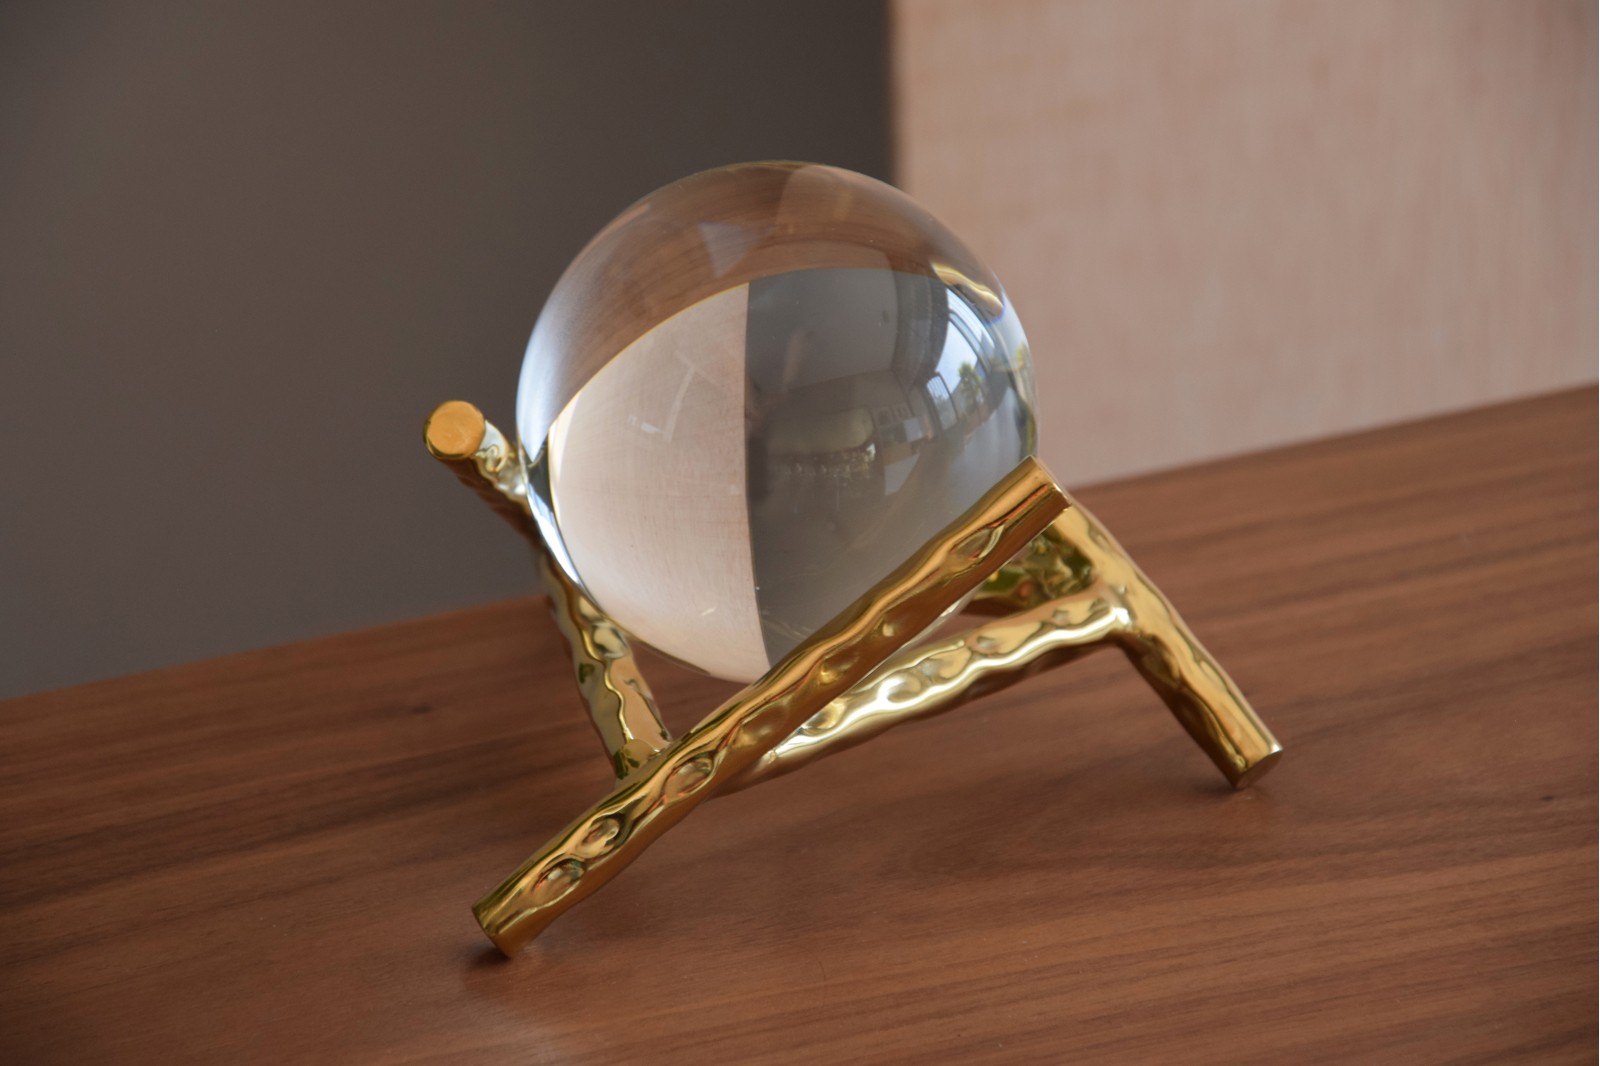 CRYSTAL BALL COLLECTION. GOLD METAL AND CRYSTAL SCULPTURE